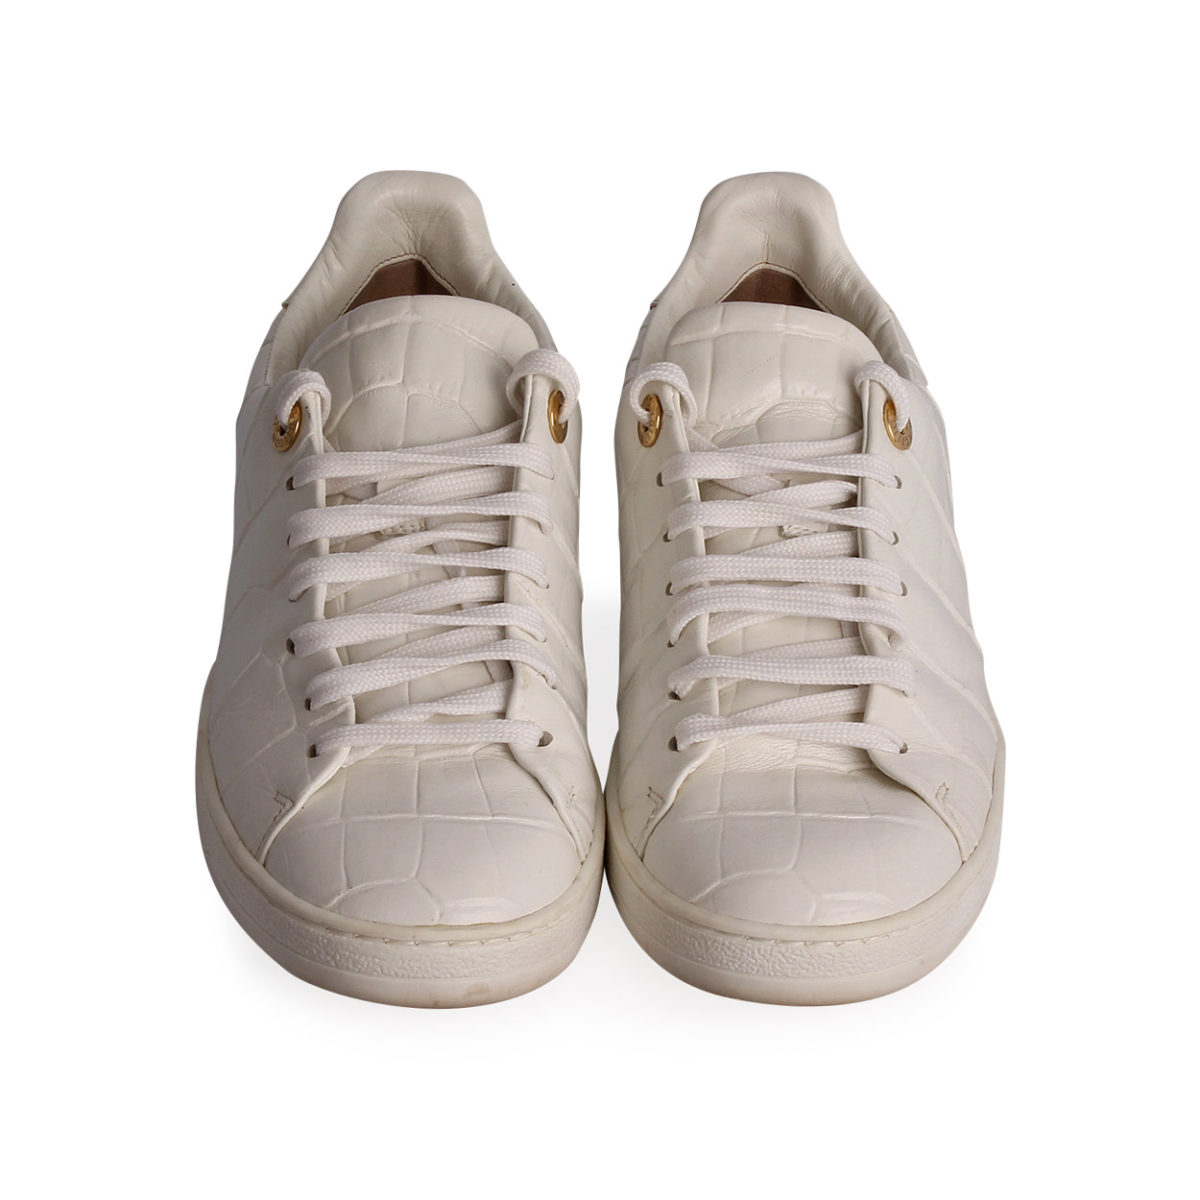 LOUIS VUITTON Croc Embossed Frontrow Sneakers White - S: 36 (3) | Luxity